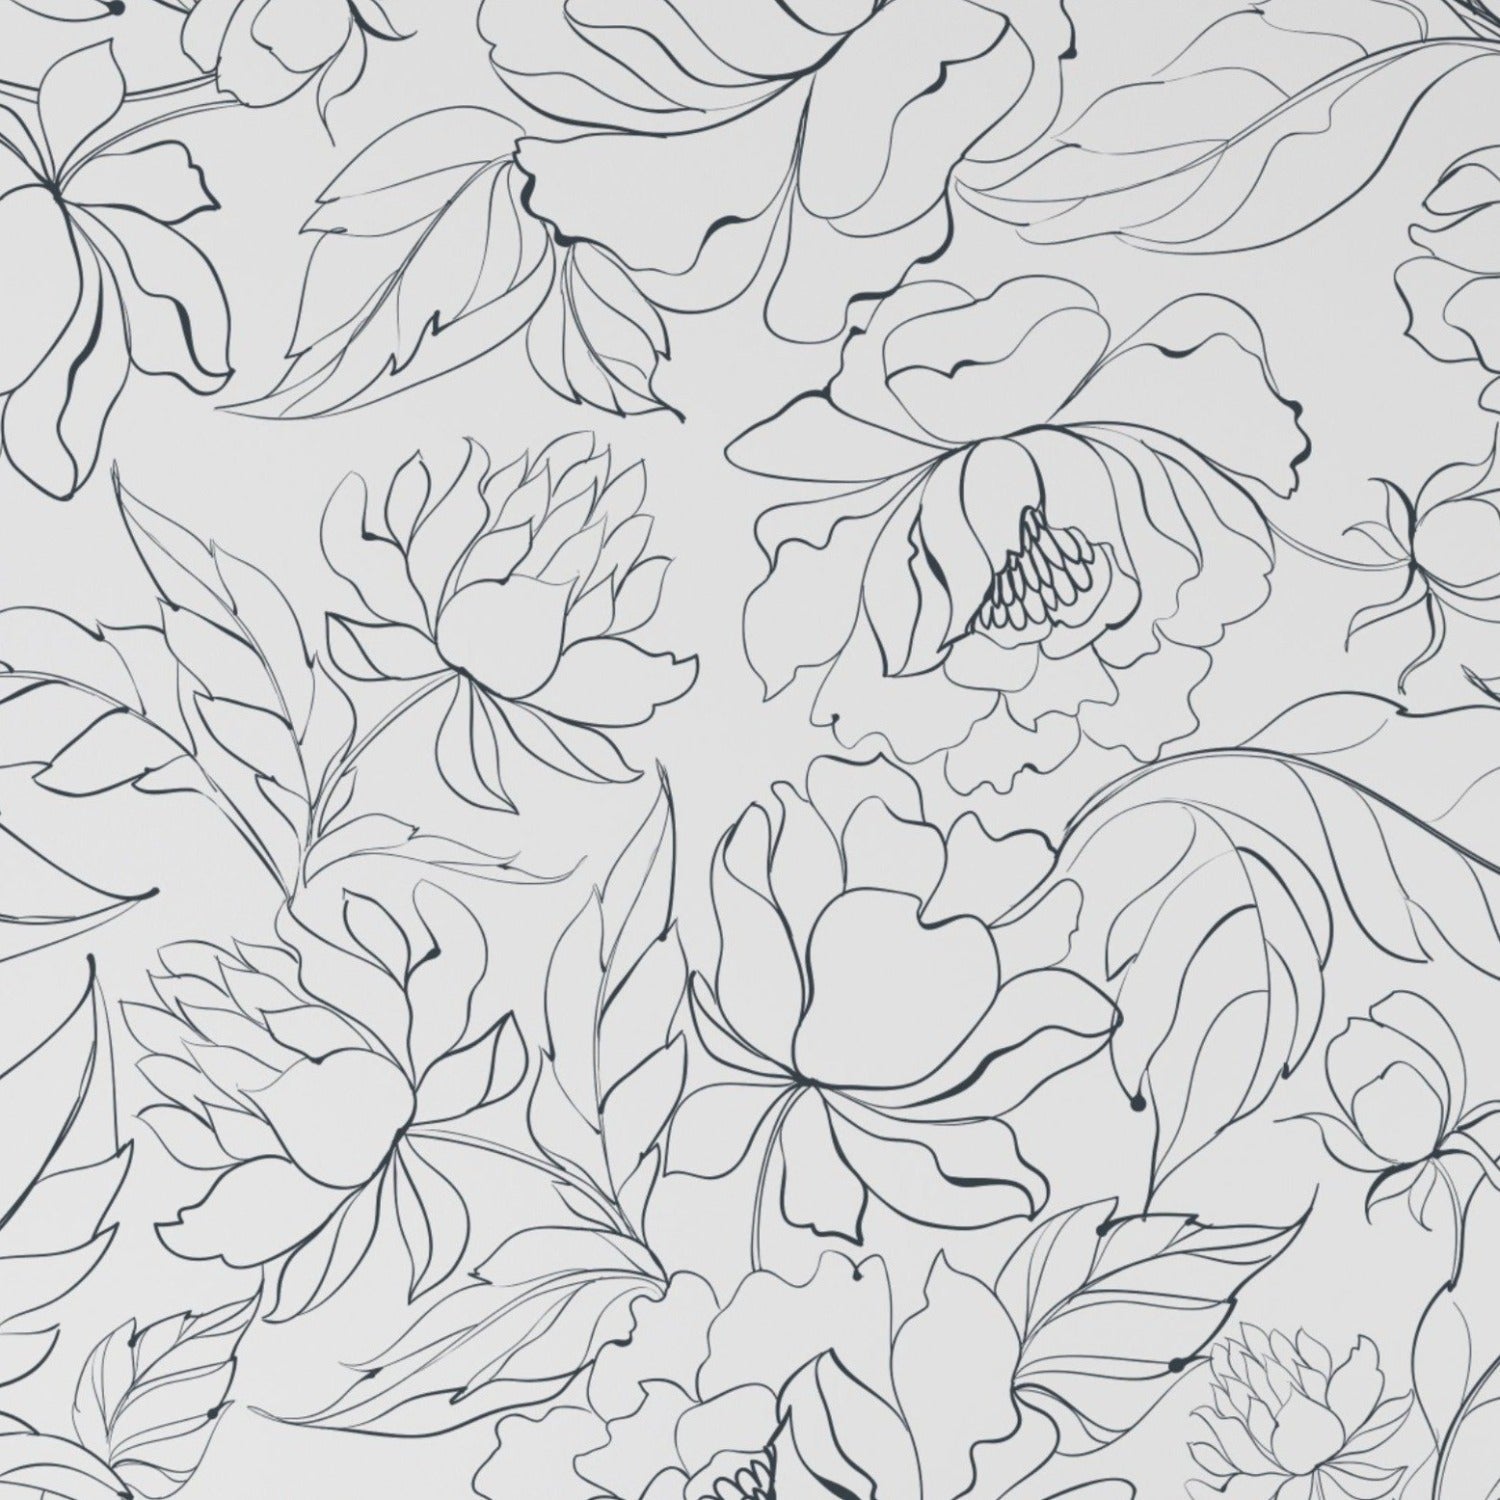 An elegant close-up of the Modern Black Floral Wallpaper featuring large, stylized floral motifs in black outlines on a clean white background, providing a contemporary and striking visual contrast.